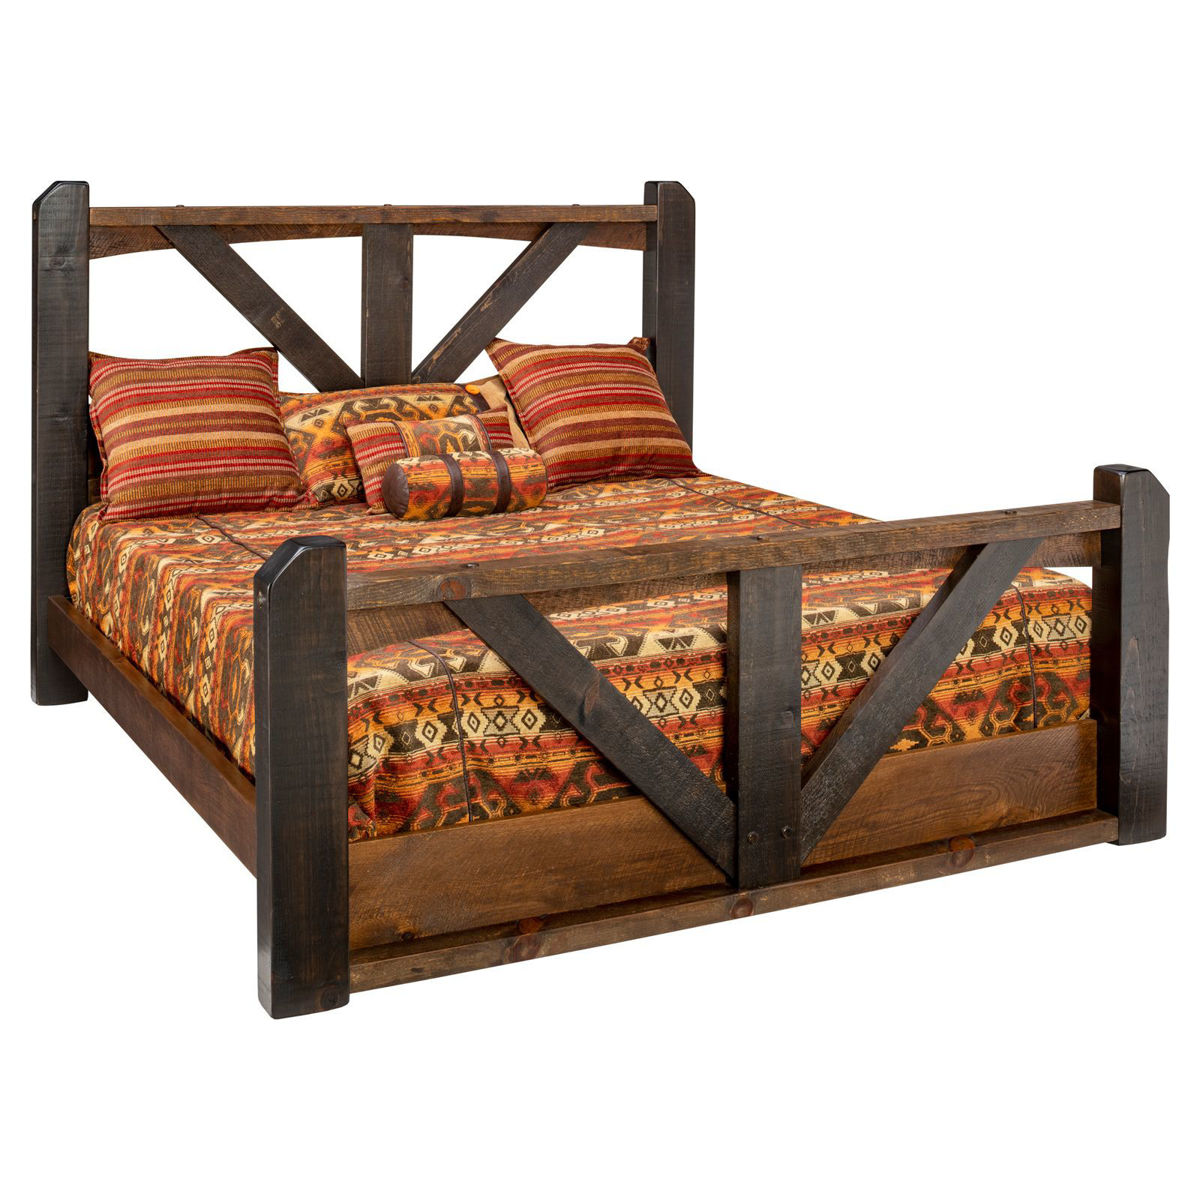 Picture of Dutton Sugar Pine King Bed